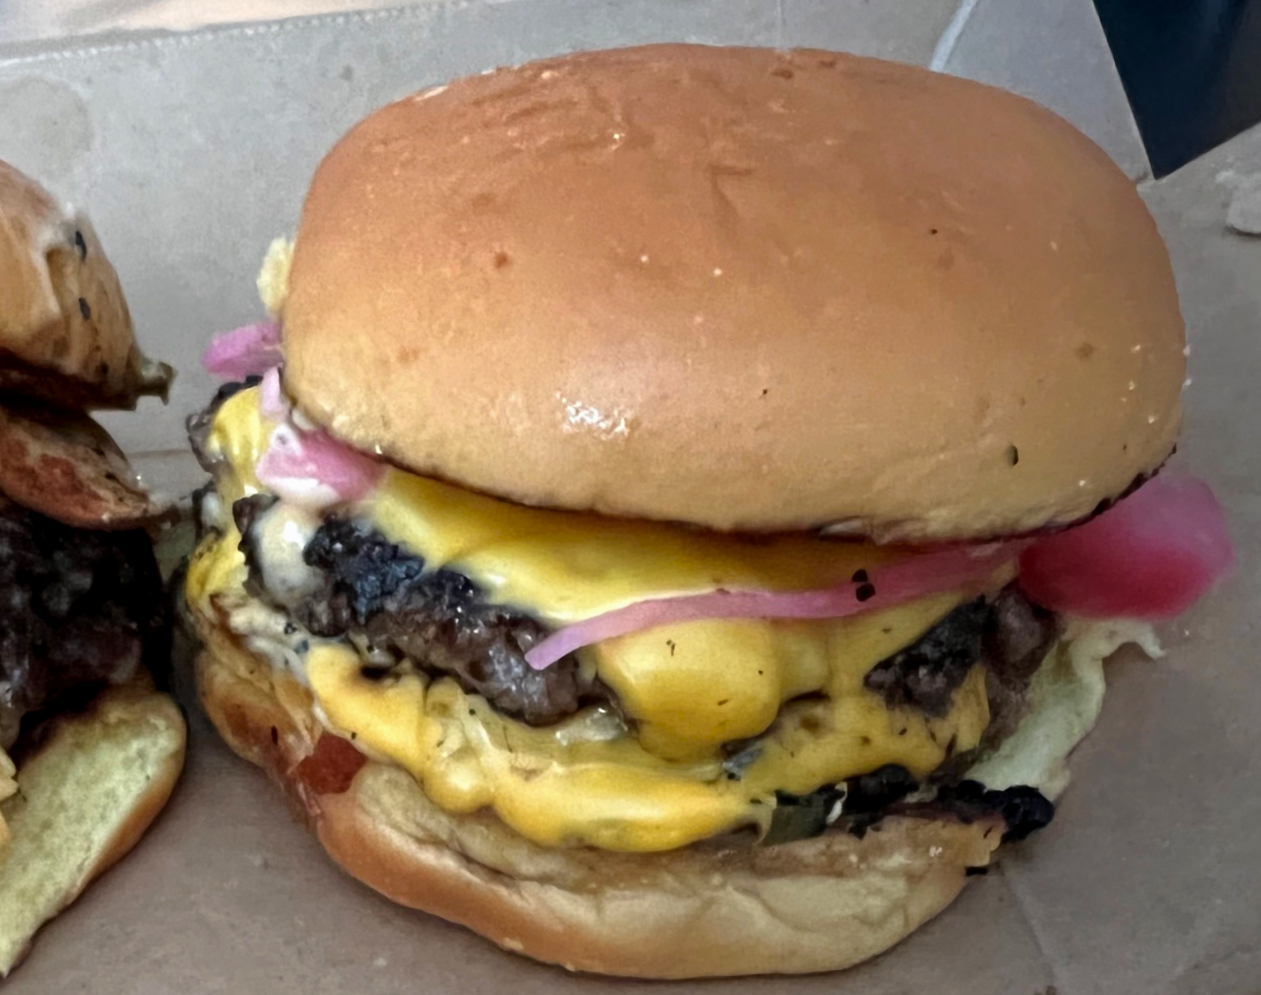 In a takeout box, there is a smashburger by the Weird Meat Boyz with two patties and American cheese dripping down the side. Photo by Alyssa Buckley.